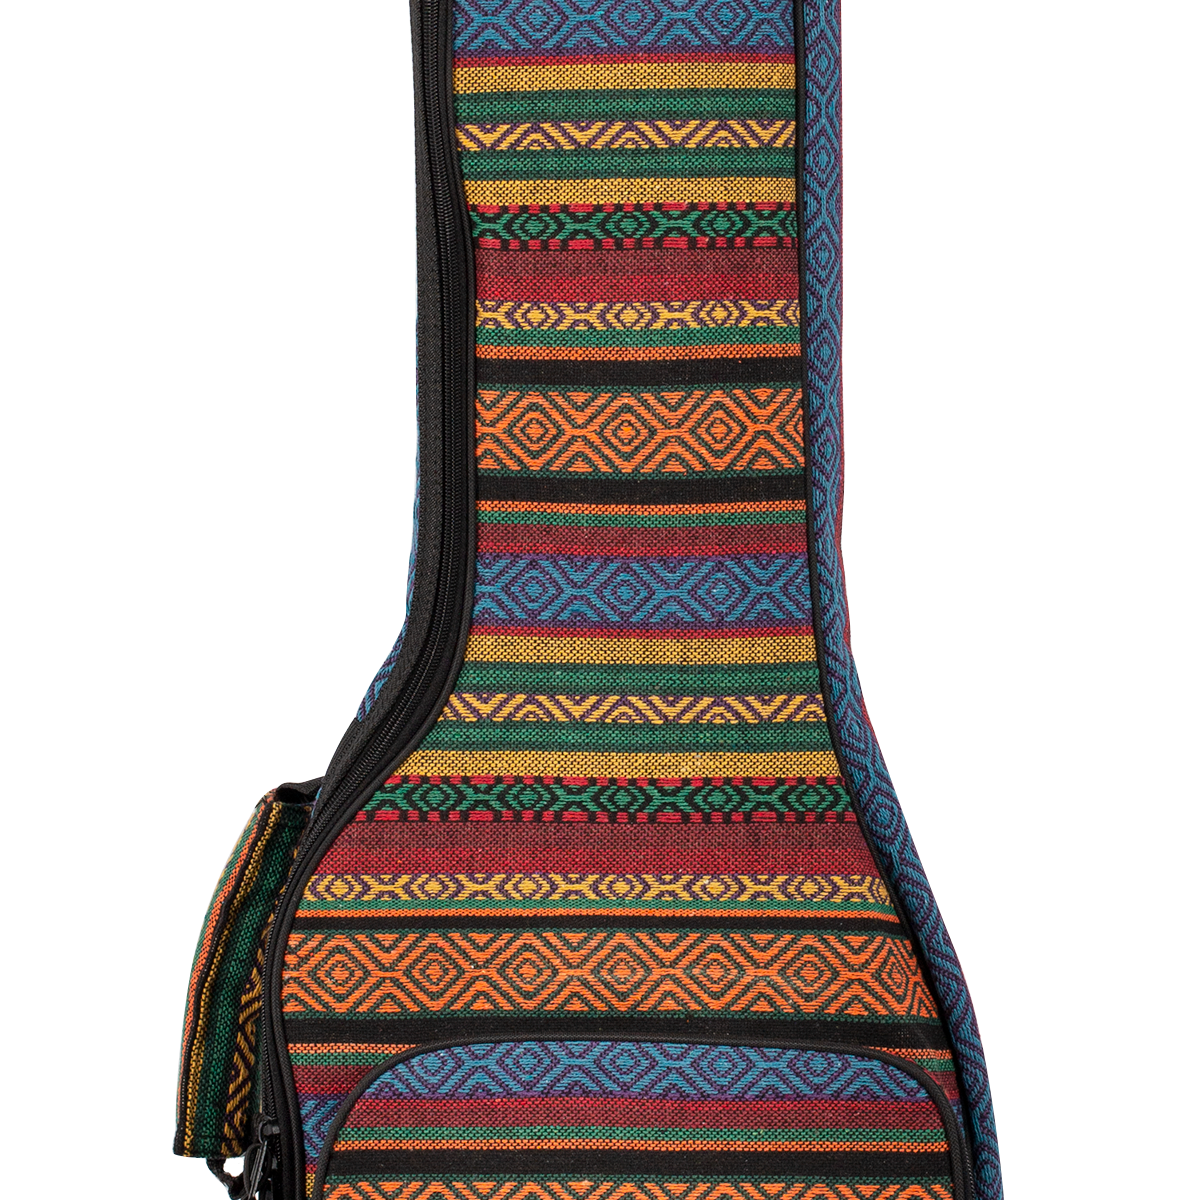 Extreme Electric Guitar Bag - Multi-Coloured Weave Pattern Fabric